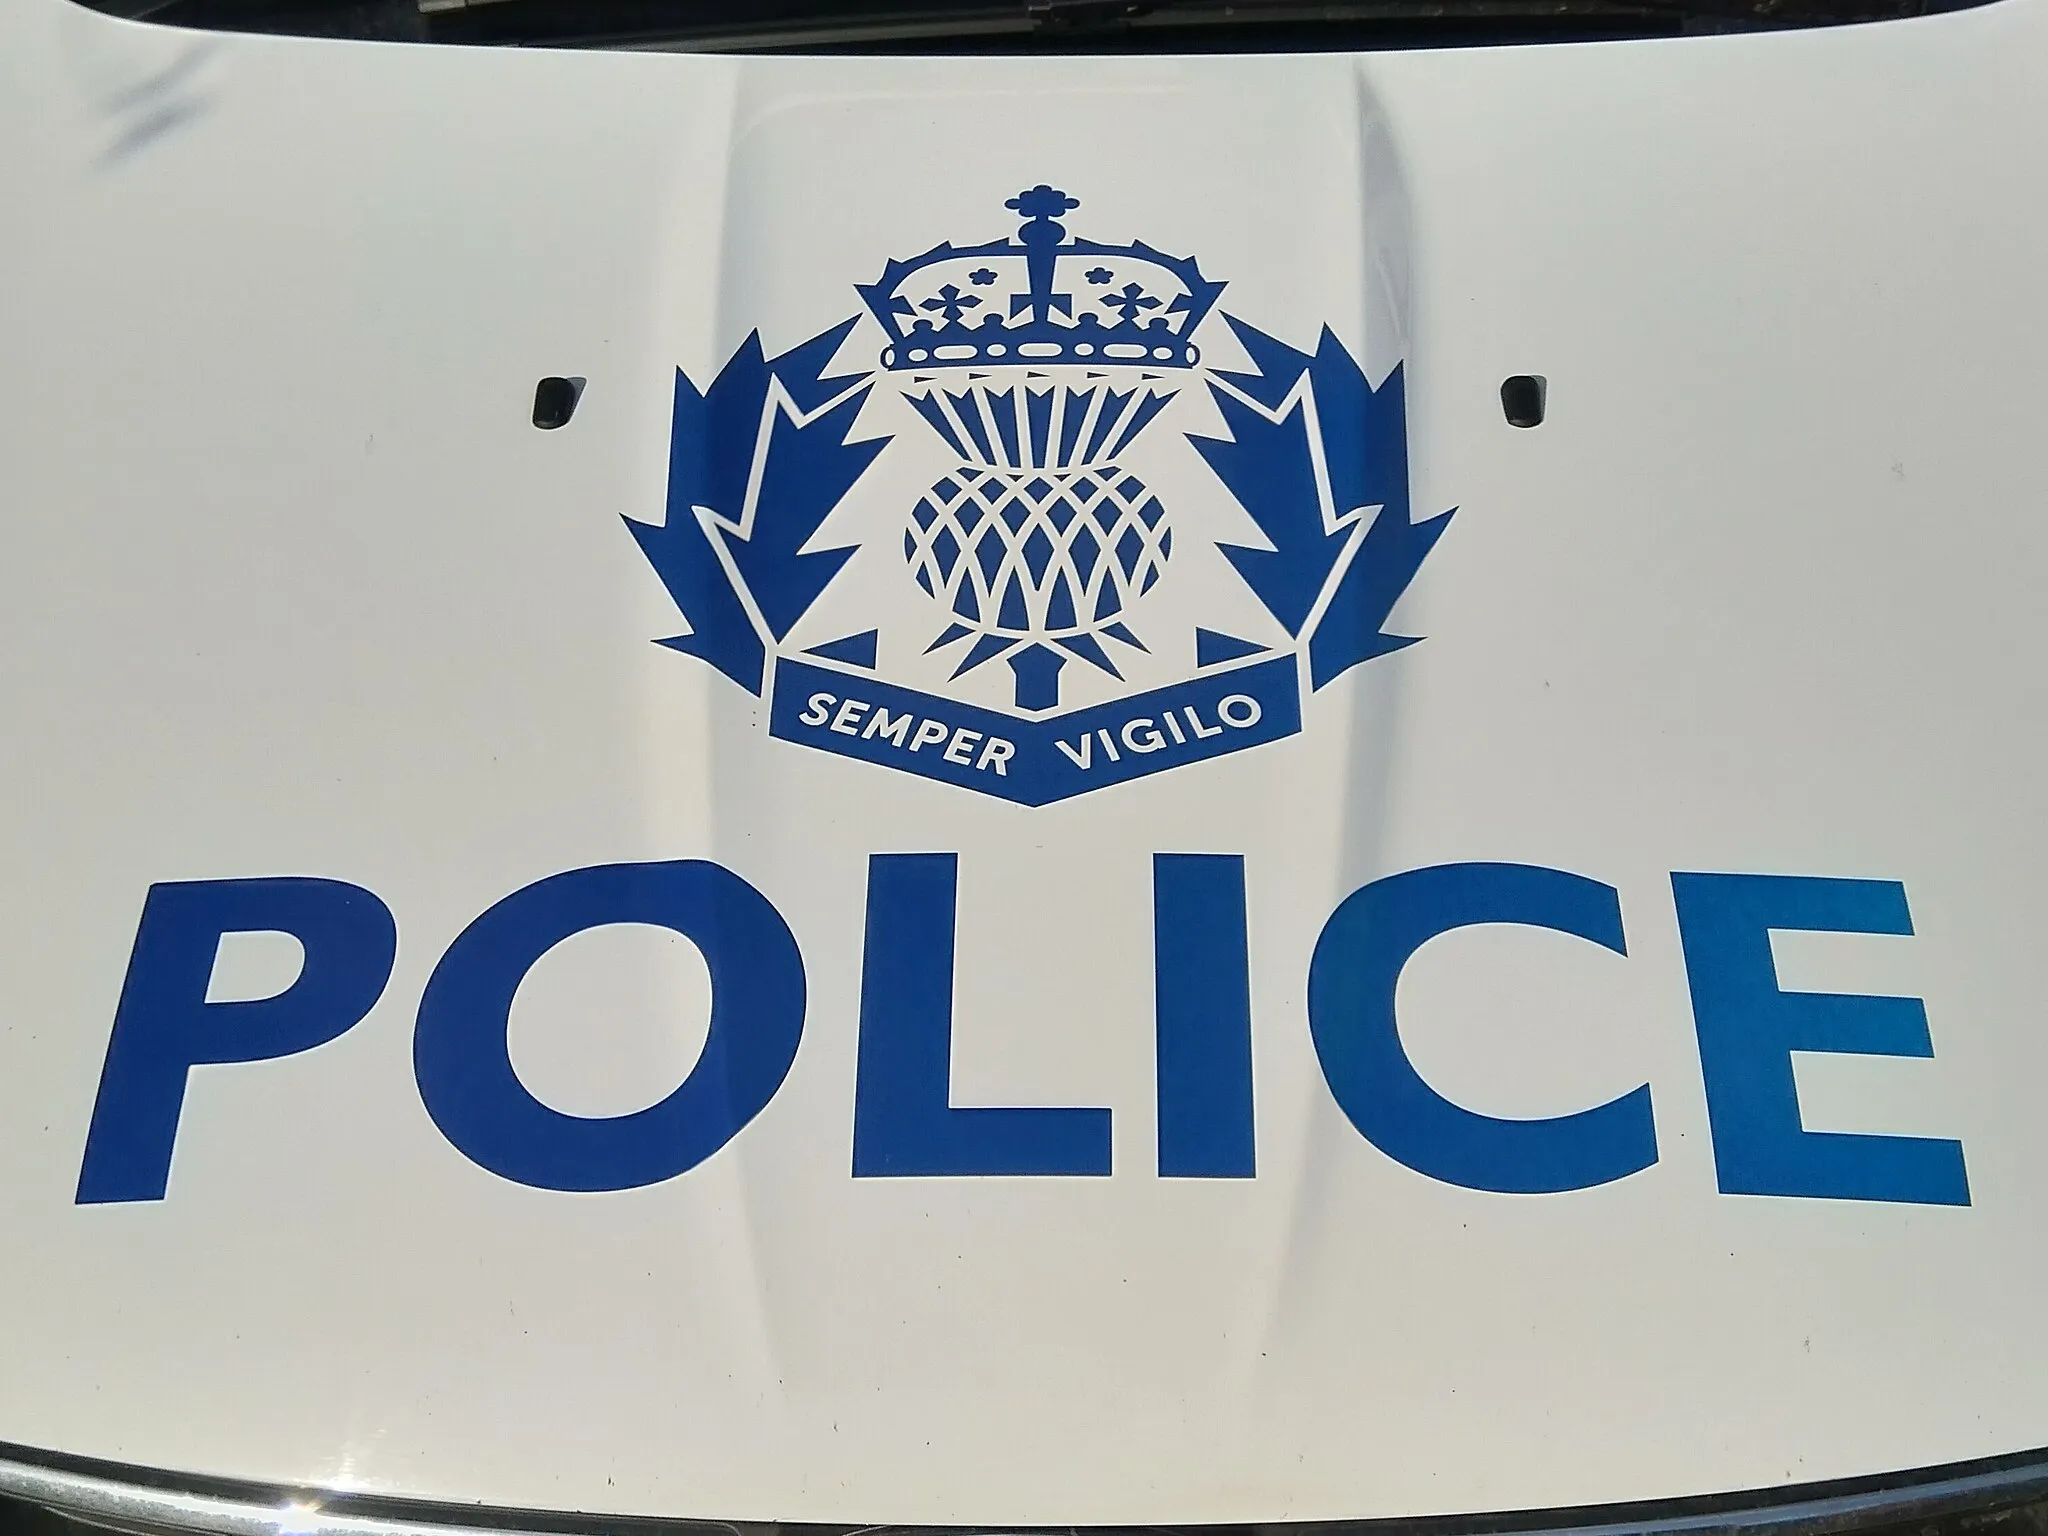 Photo showing: Police Scotland vehicle decal (Monolingual) showing the stylised Royal Thistle badge (A thistle surmounted by the Crown of Scotland) and Latin motto SEMPER VIGILO (Always Vigilant).